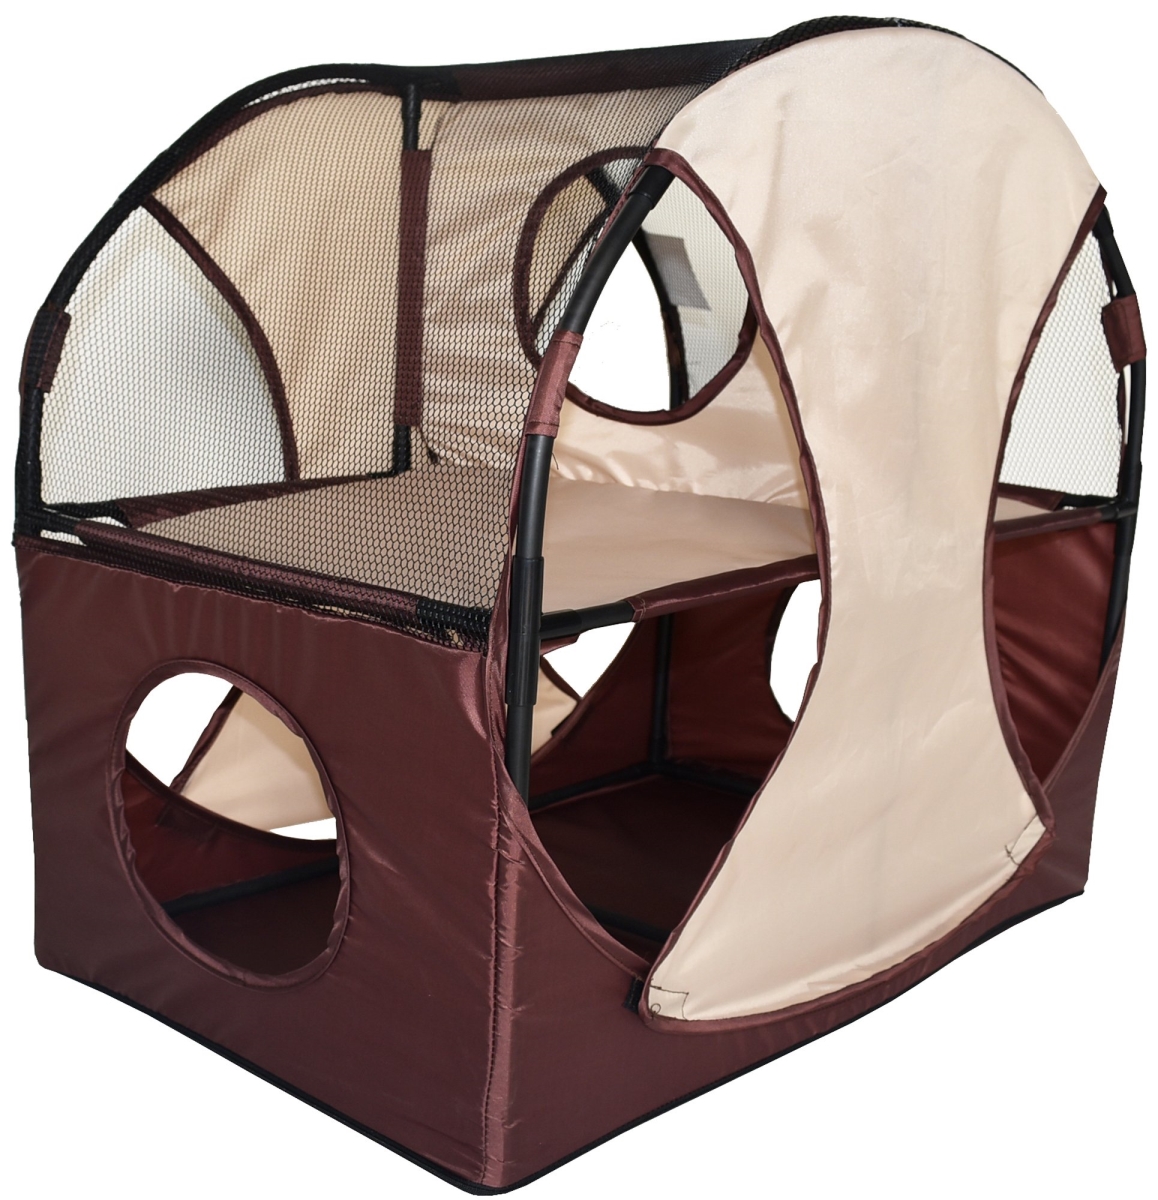 Picture of Pet Life PTT7KHBR Kitty Play Pet Cat House, Khaki & Brown - One Size